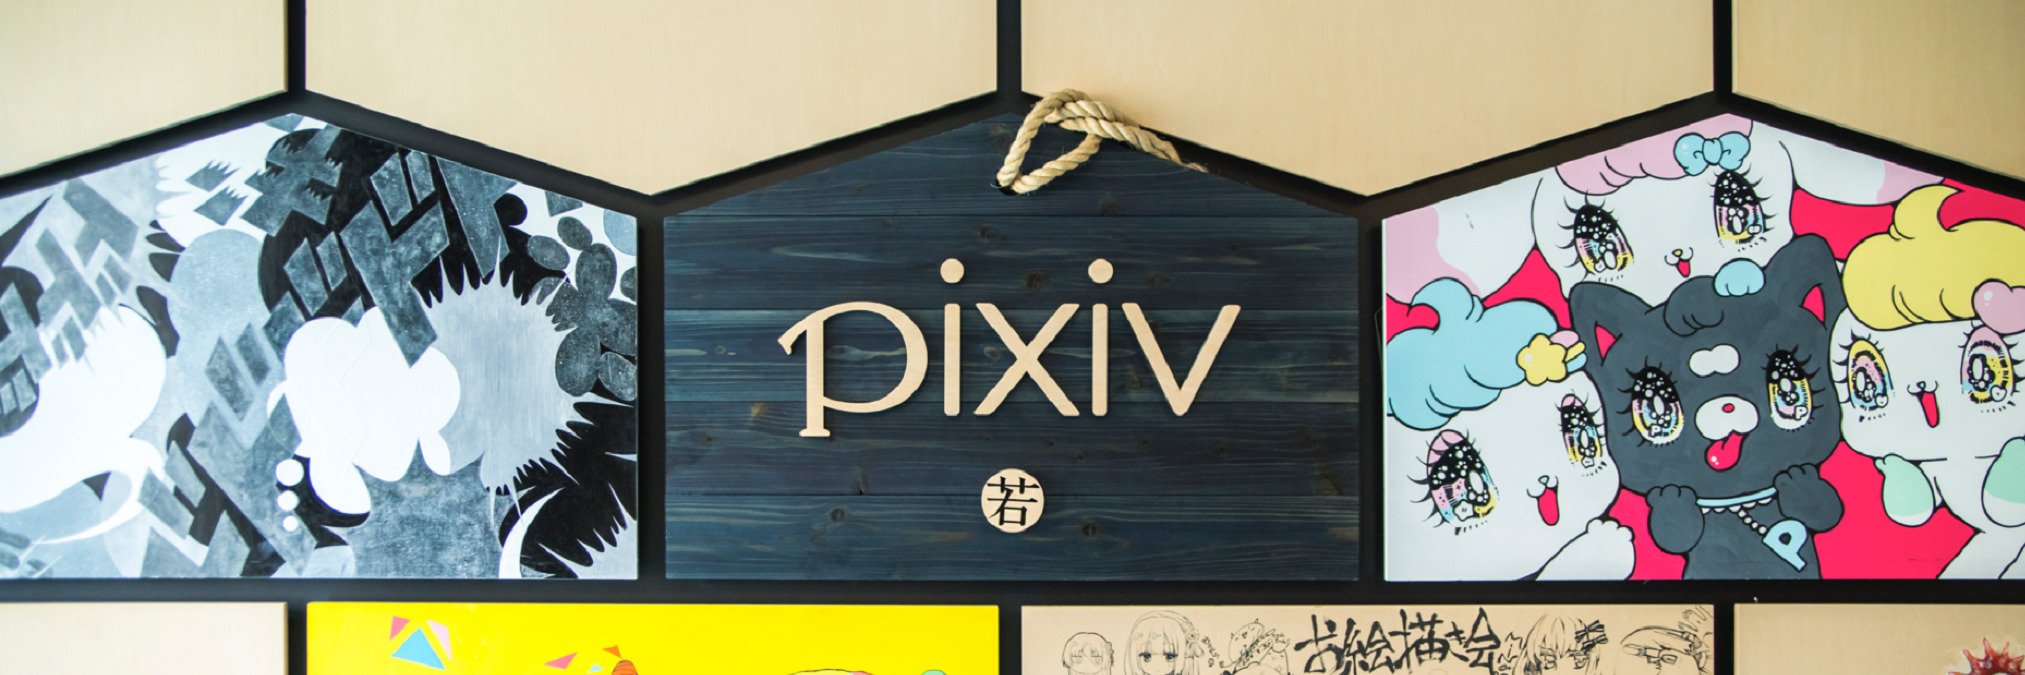 pixiv to tackle the issue of AI art misuse, imitation, data collection & more 